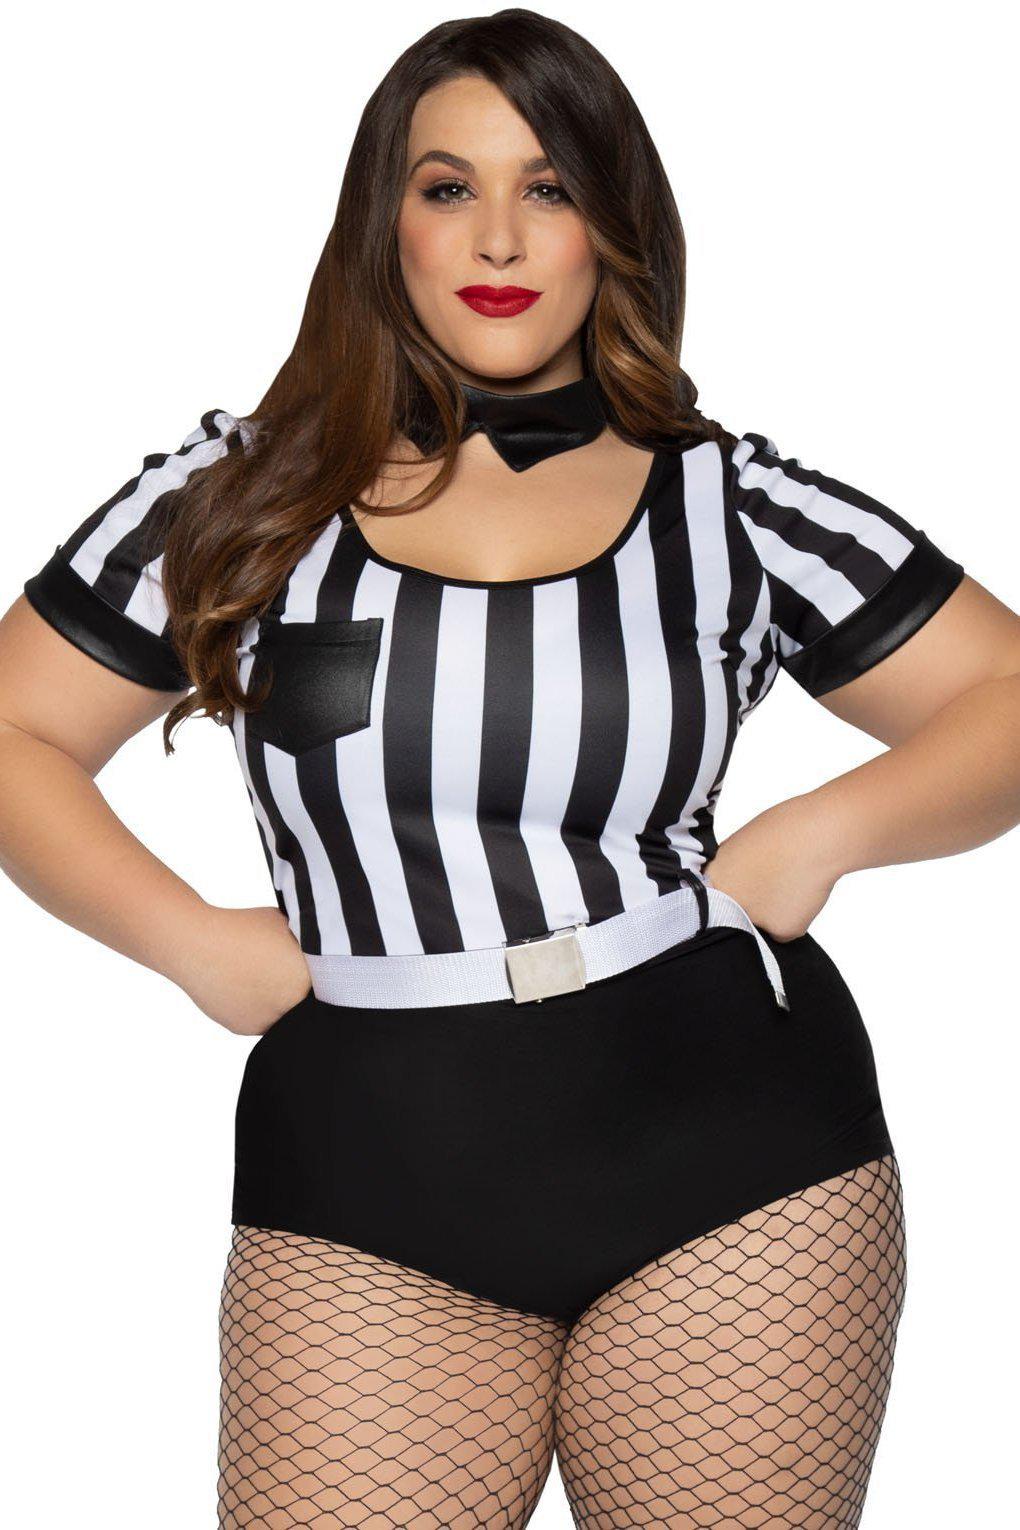 Plus Size No Rules Referee Teddy-Other Costumes-Leg Avenue-Black-1/2XL-SEXYSHOES.COM